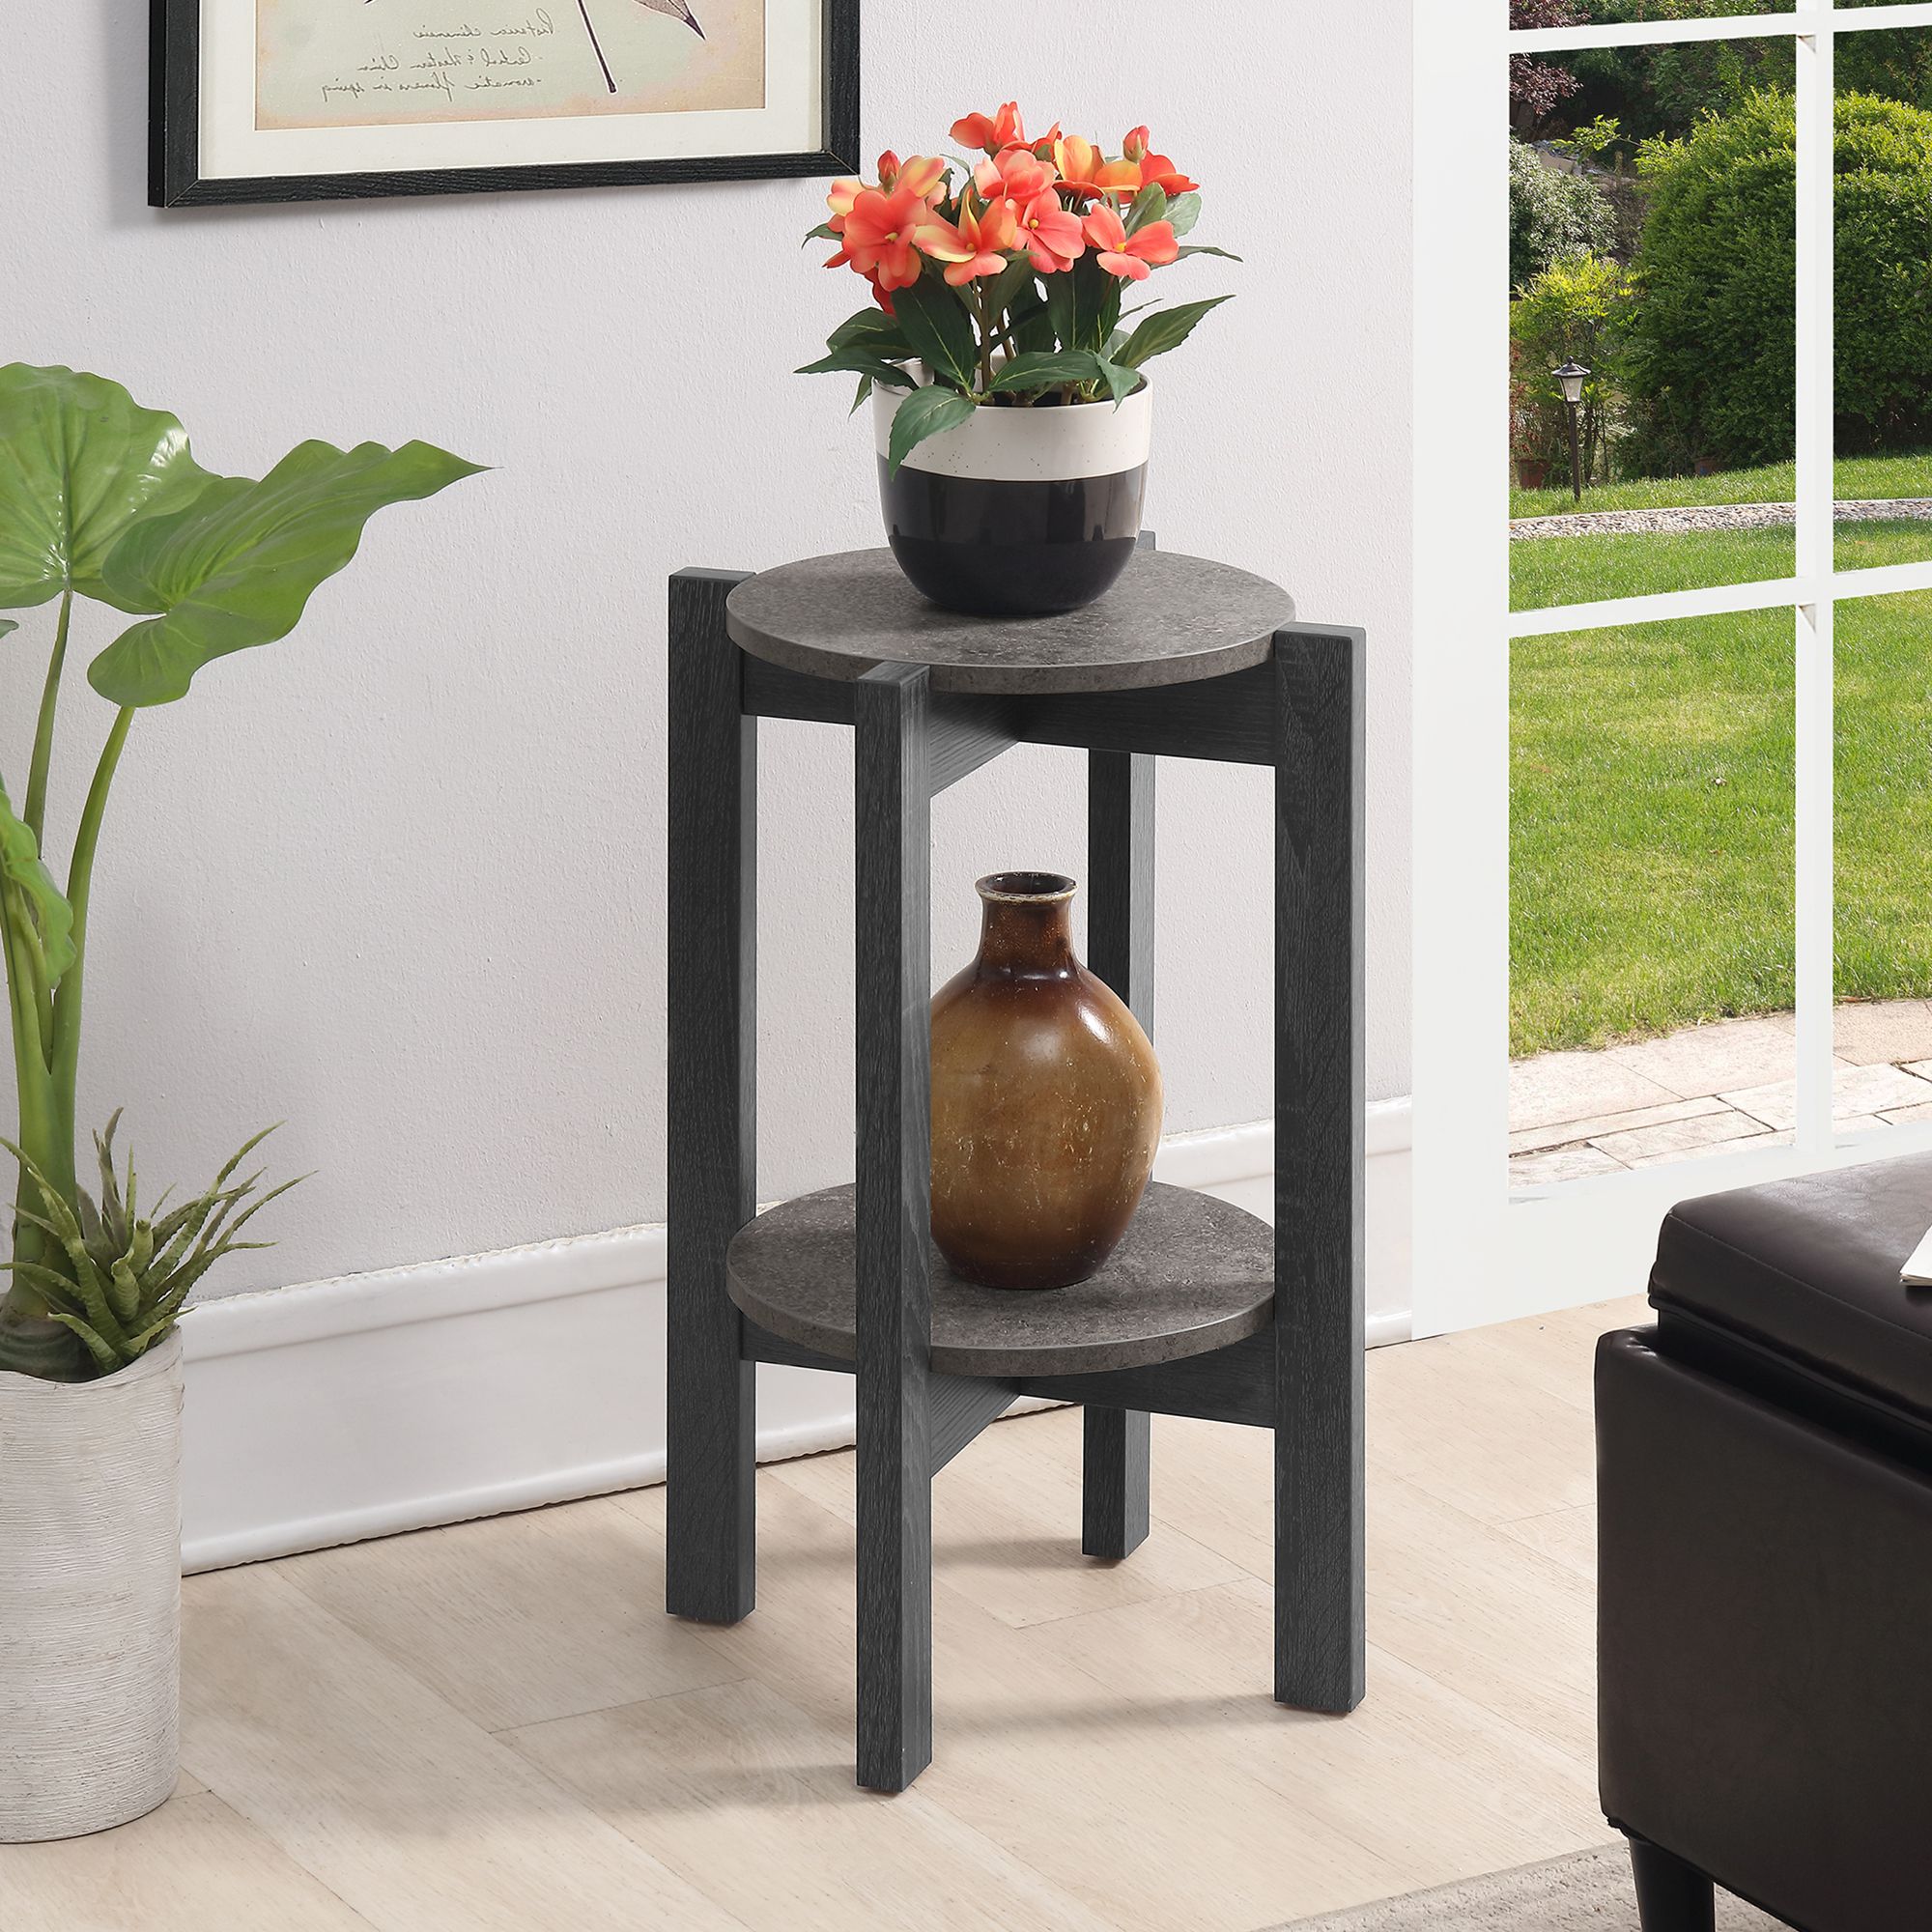 Newport Medium 2 Tier Plant Stand, Faux Cement/Weathered Gray – Walmart Inside Weathered Gray Plant Stands (View 5 of 15)